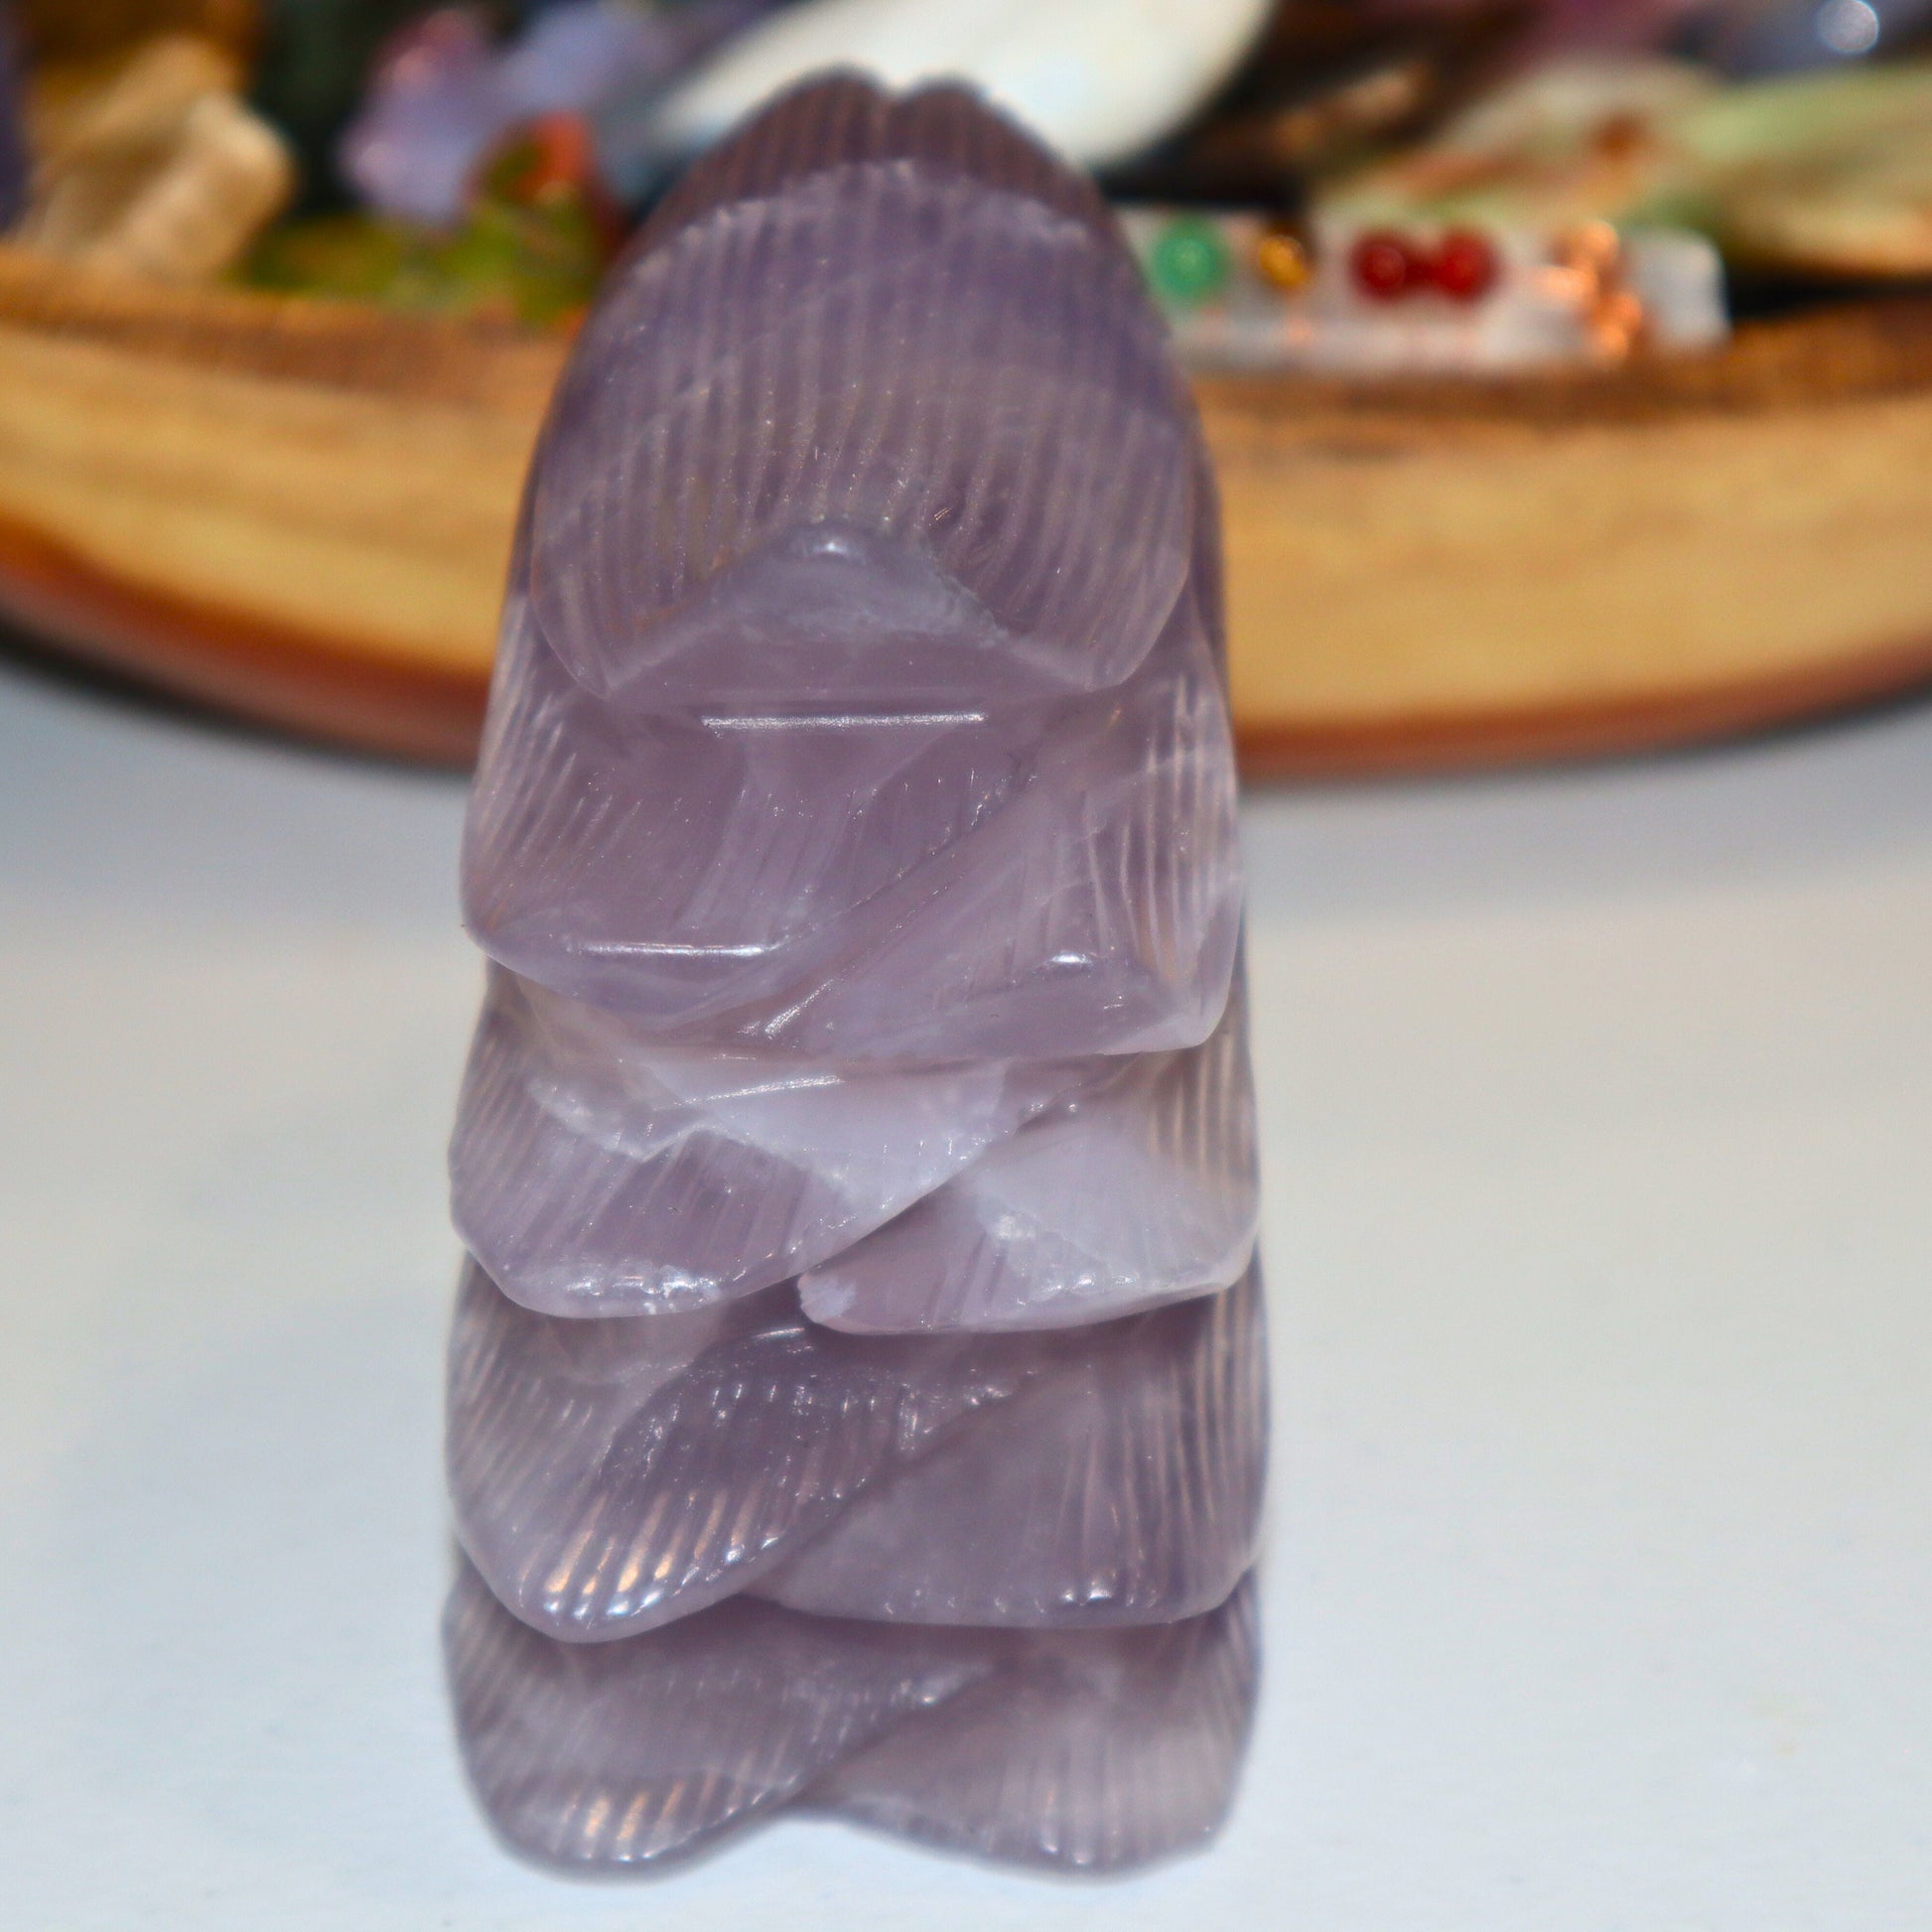 Purple Fluorite Eagle Head Carving - Unique Gemstone Sculpture, Healing Crystal Art, Home Decor, Gift for Nature Lovers, Handcrafted on Etsy